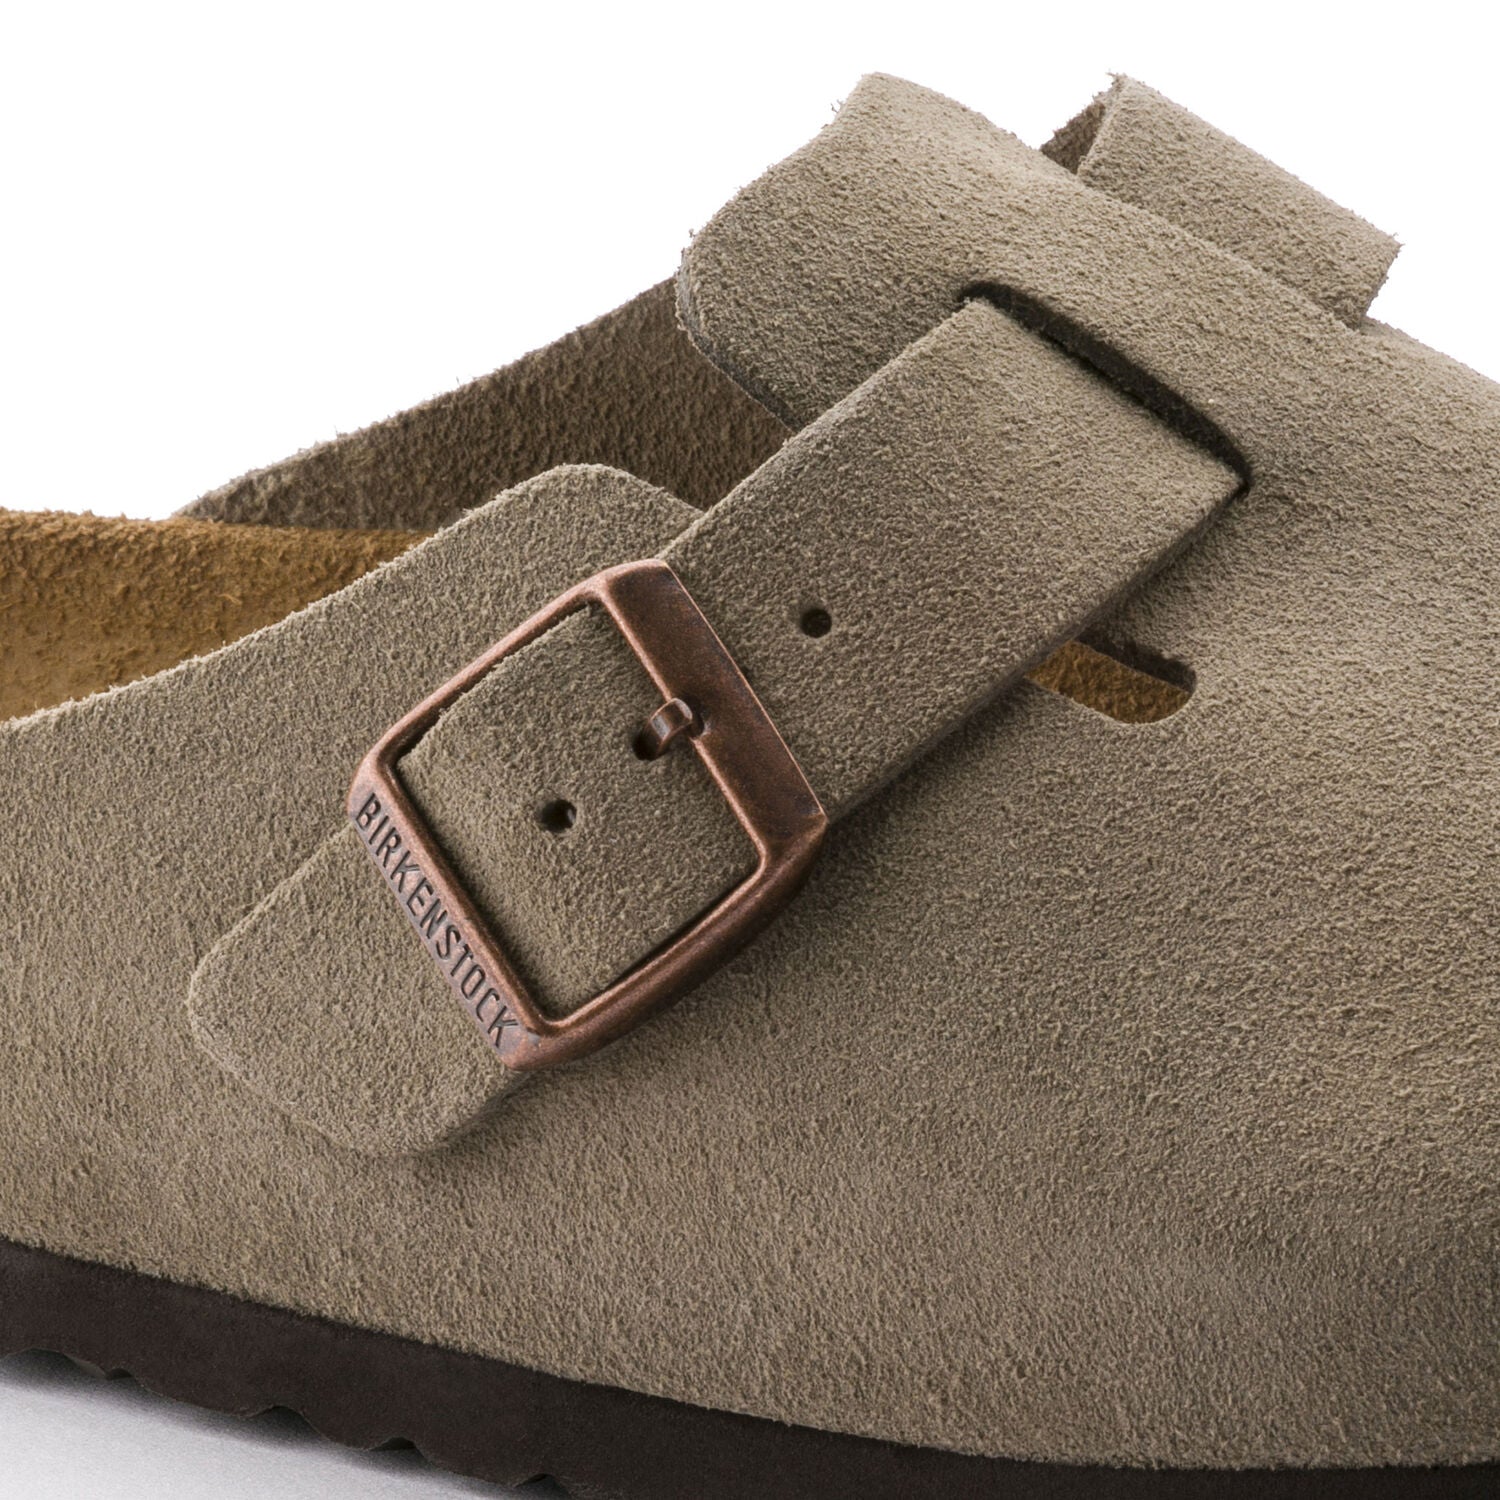 Birkenstock Boston Taupe Suede Soft Footbed Made In Germany